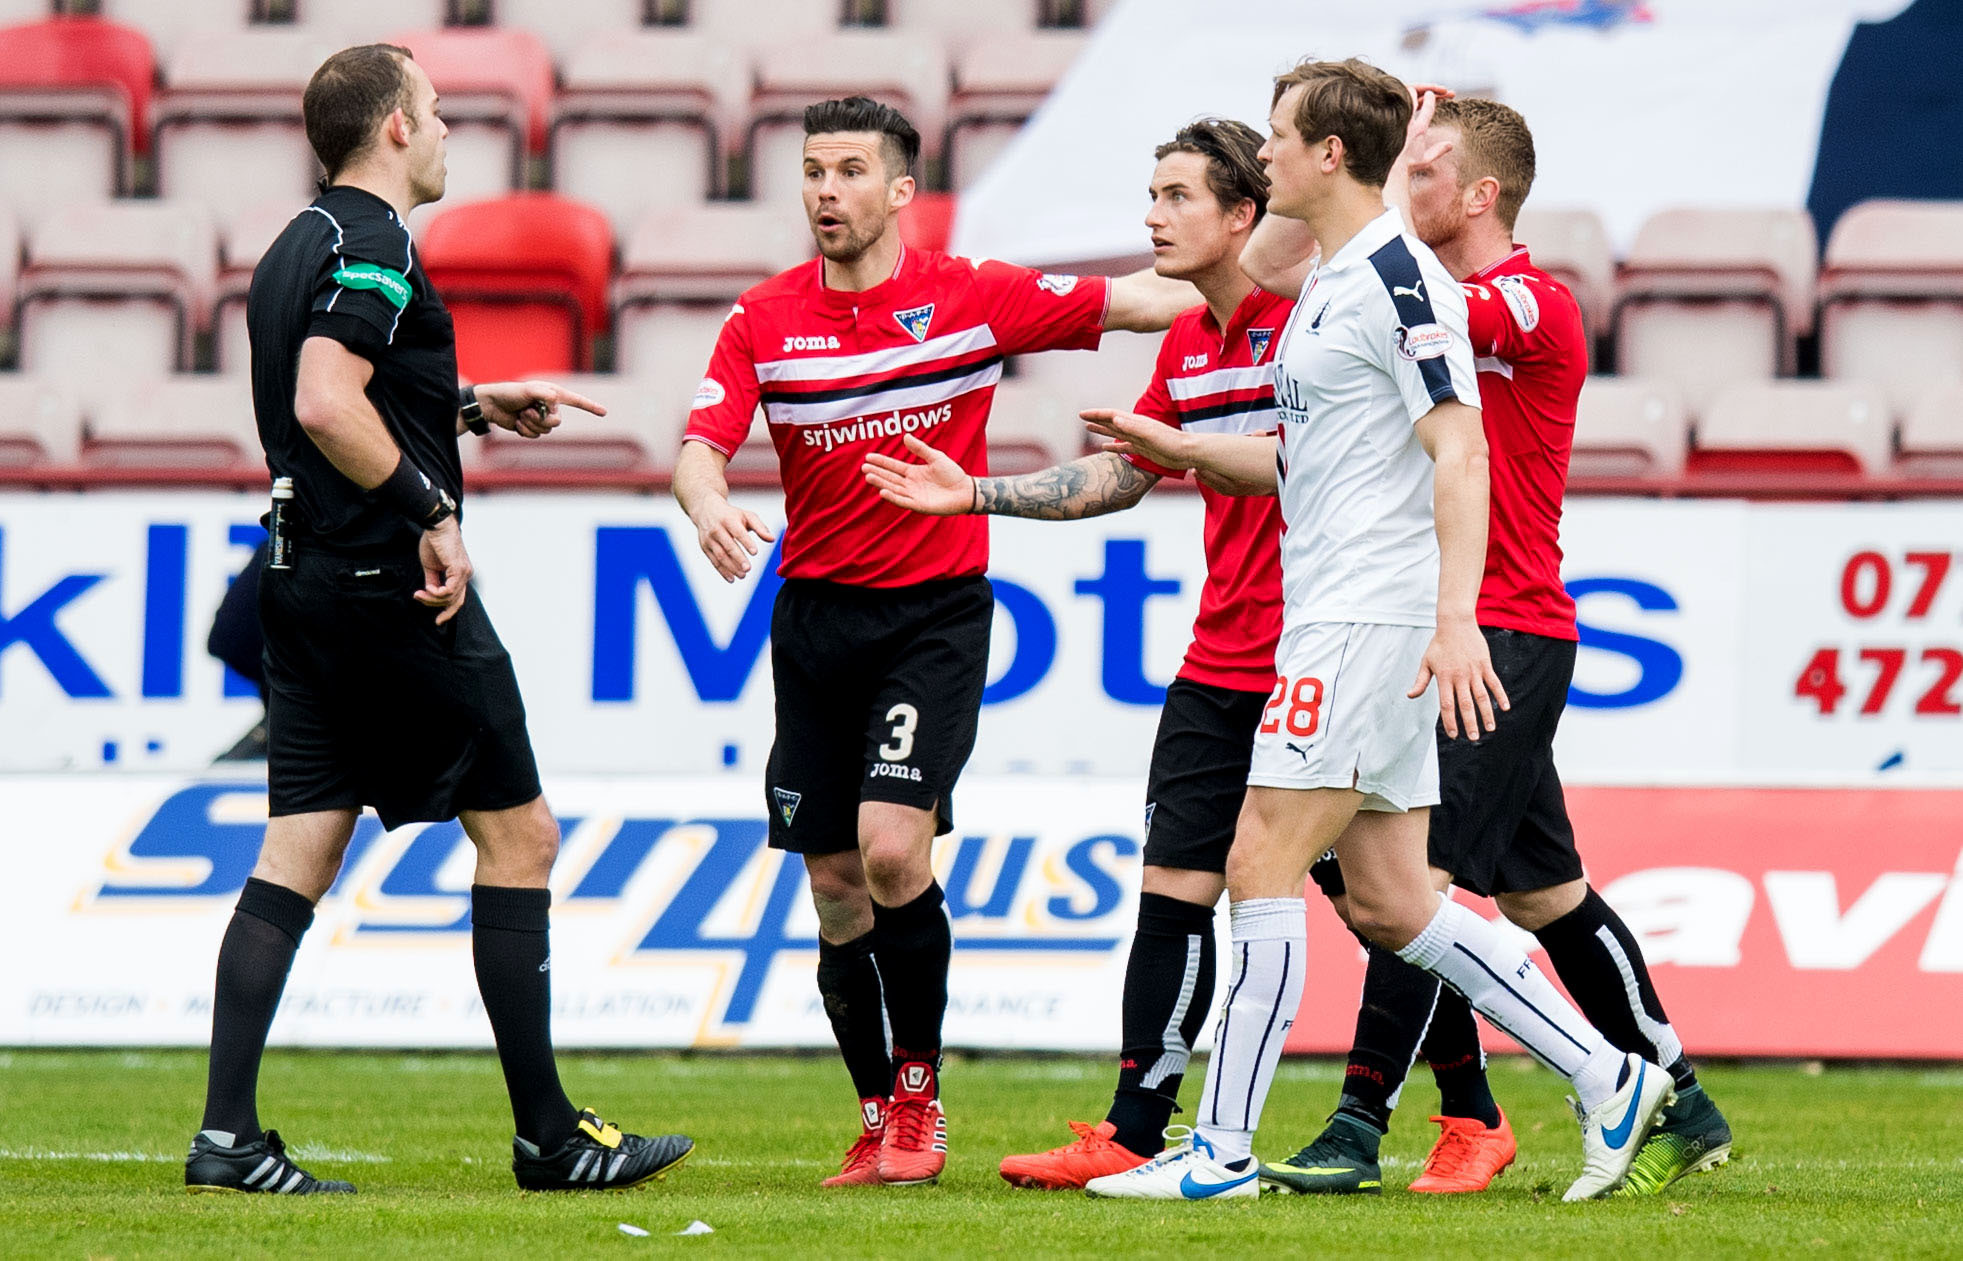 Dunfermline players contest a decision in their match with Falkirk. The game has now proved controversial off the field as well.